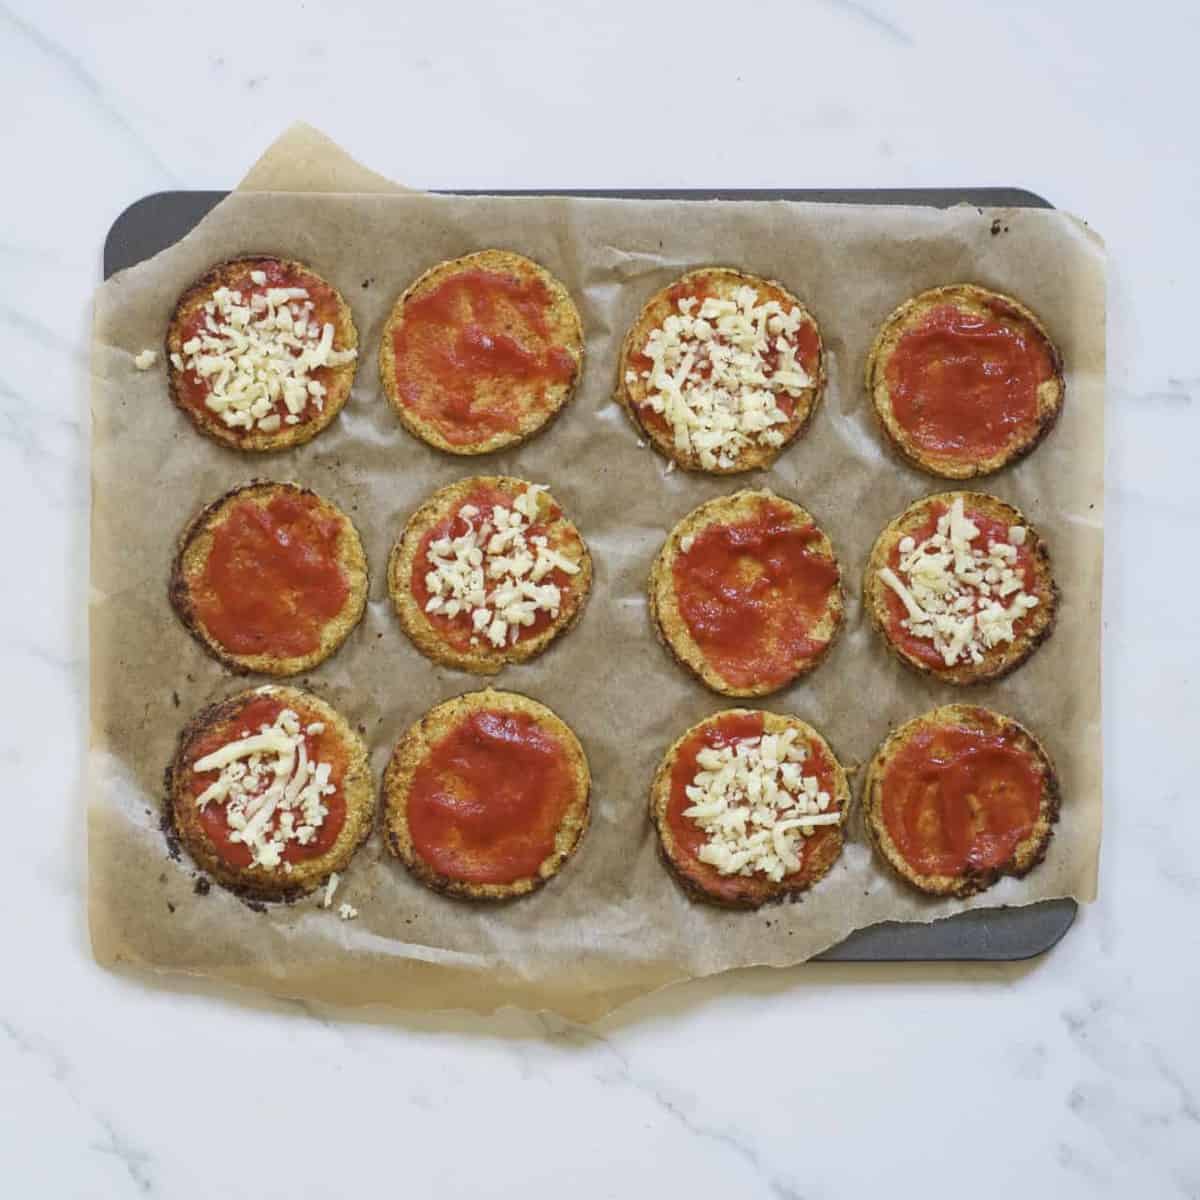 Baked mimi pizzas topped with tomato sauce and some with cheese on a baking tray